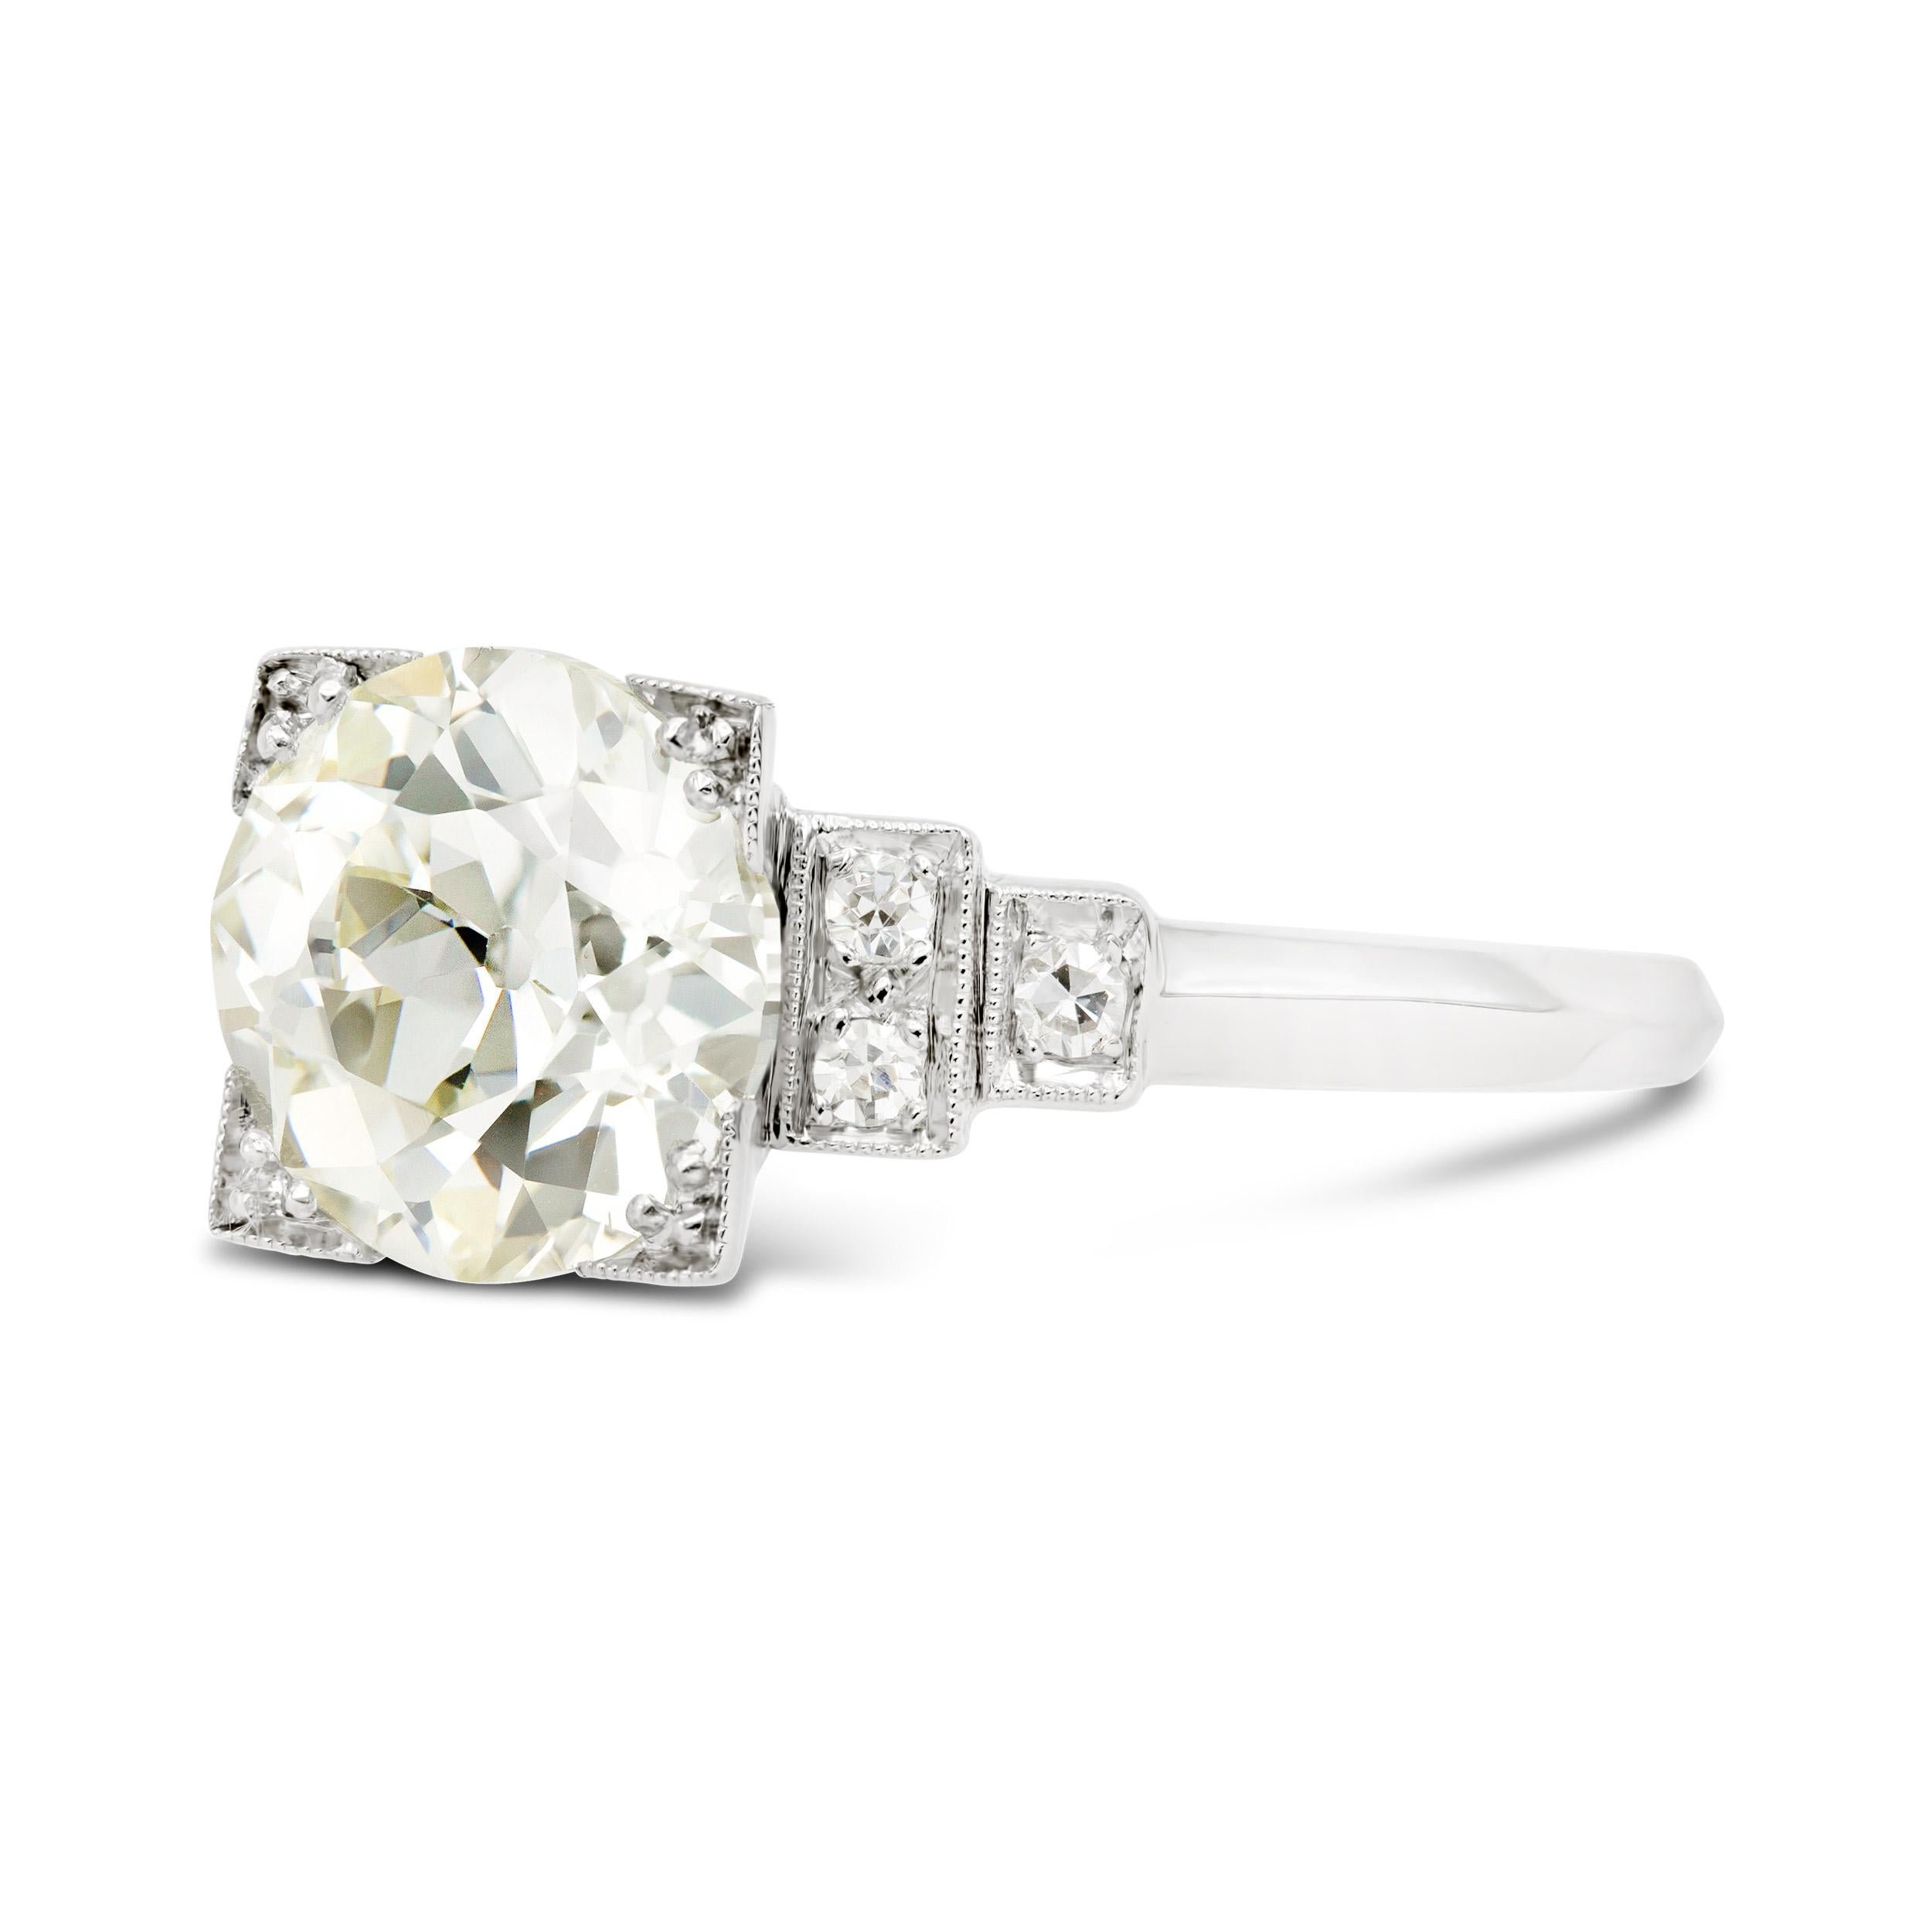 An amazing deco-era engagement ring that screams vintage charm. A 2.23 carat old European cut diamond, graded N VS1 by GIA, has great proportions and looks super bright in this geometric platinum setting. A perfect 2 carat engagement ring option for